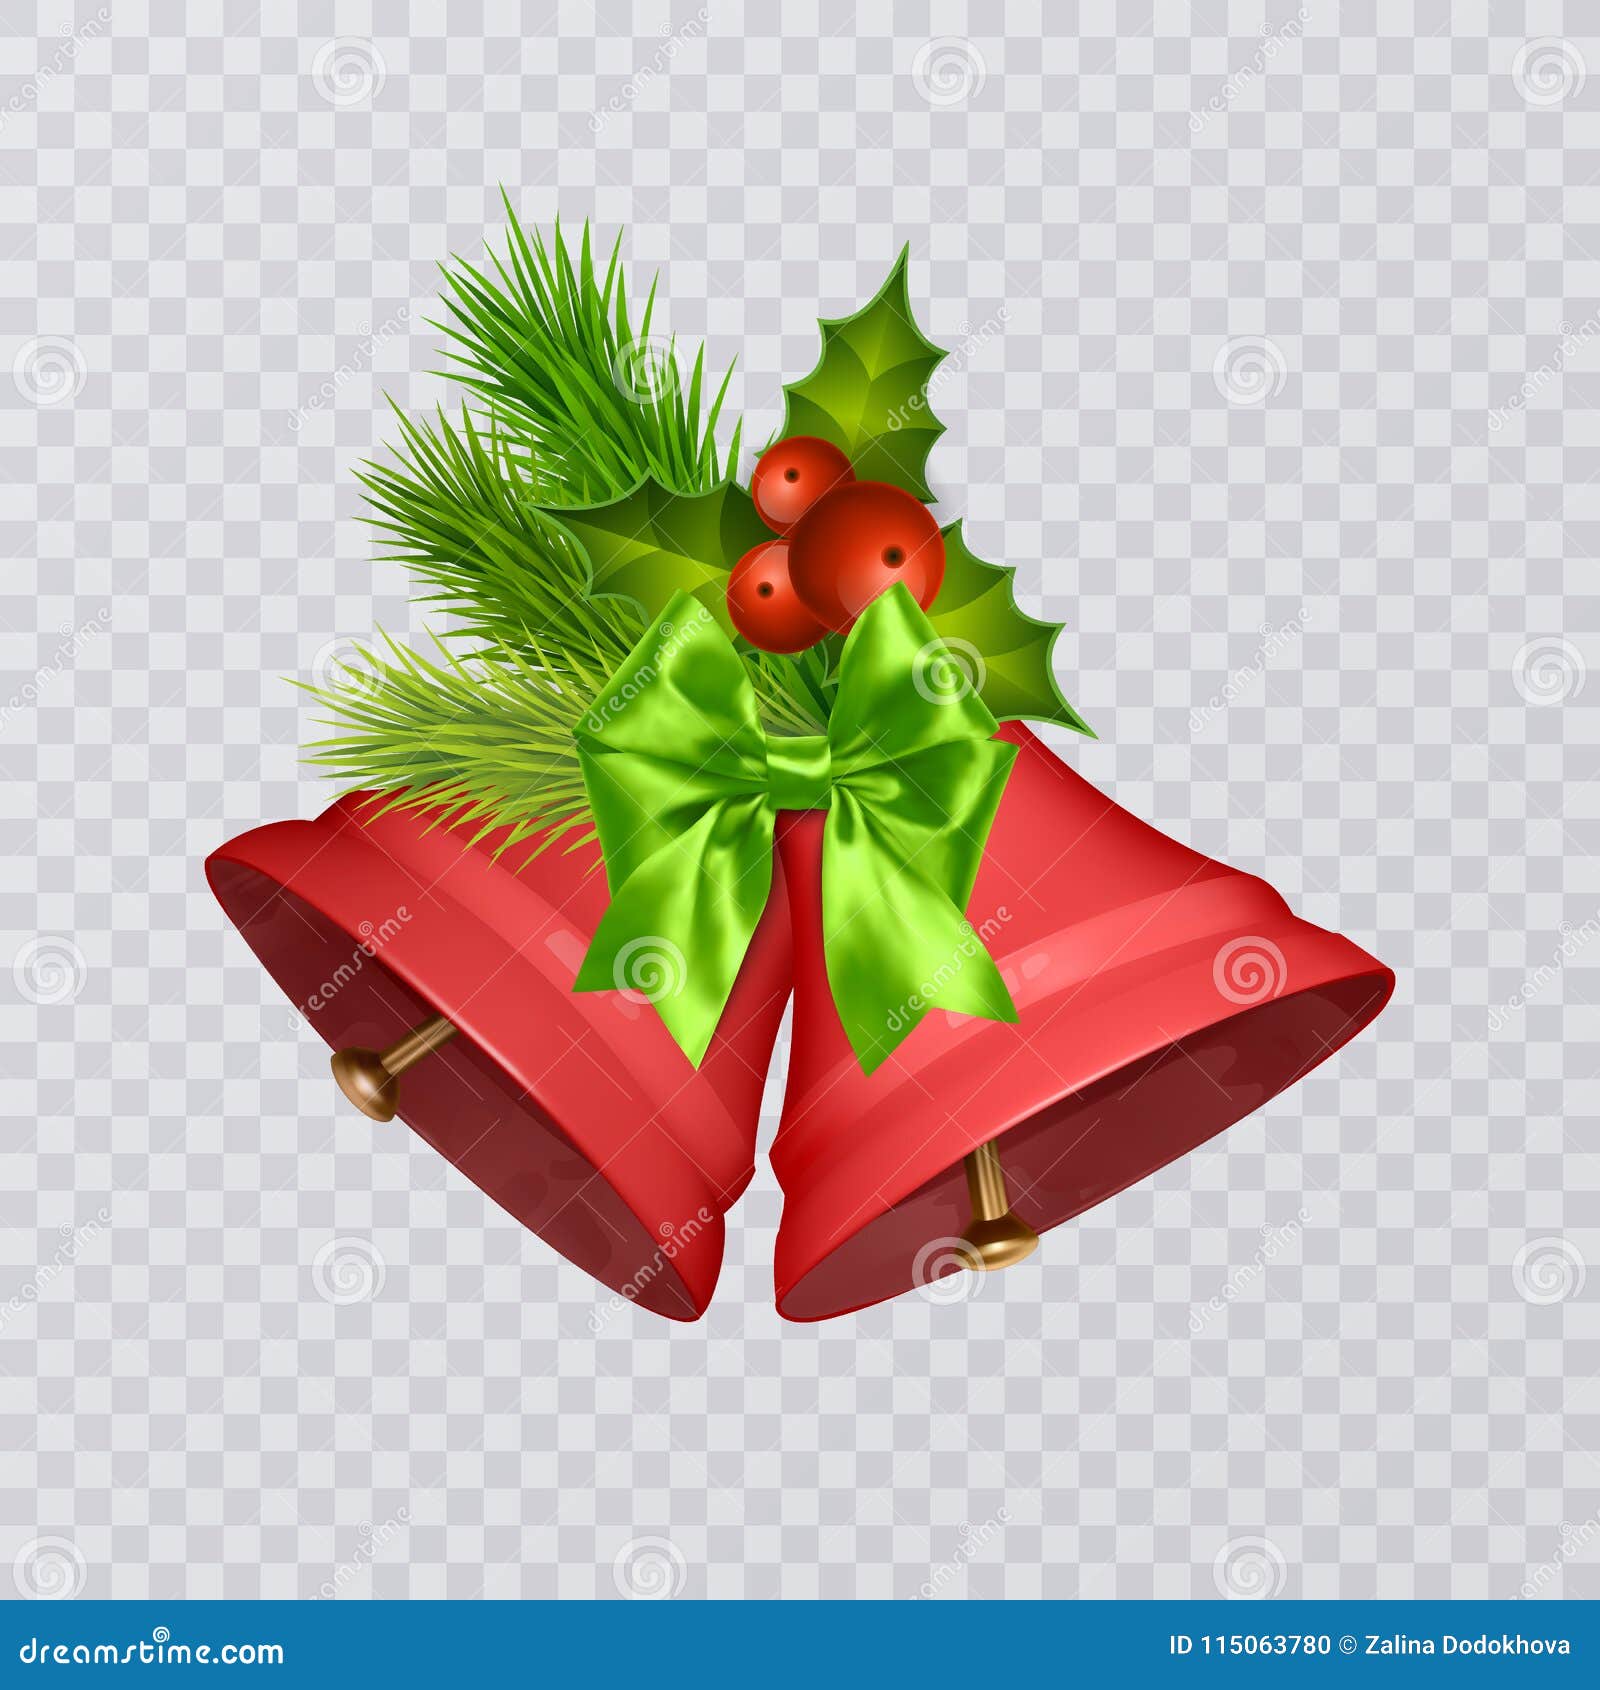 Christmas red bell with bow - vector clip art